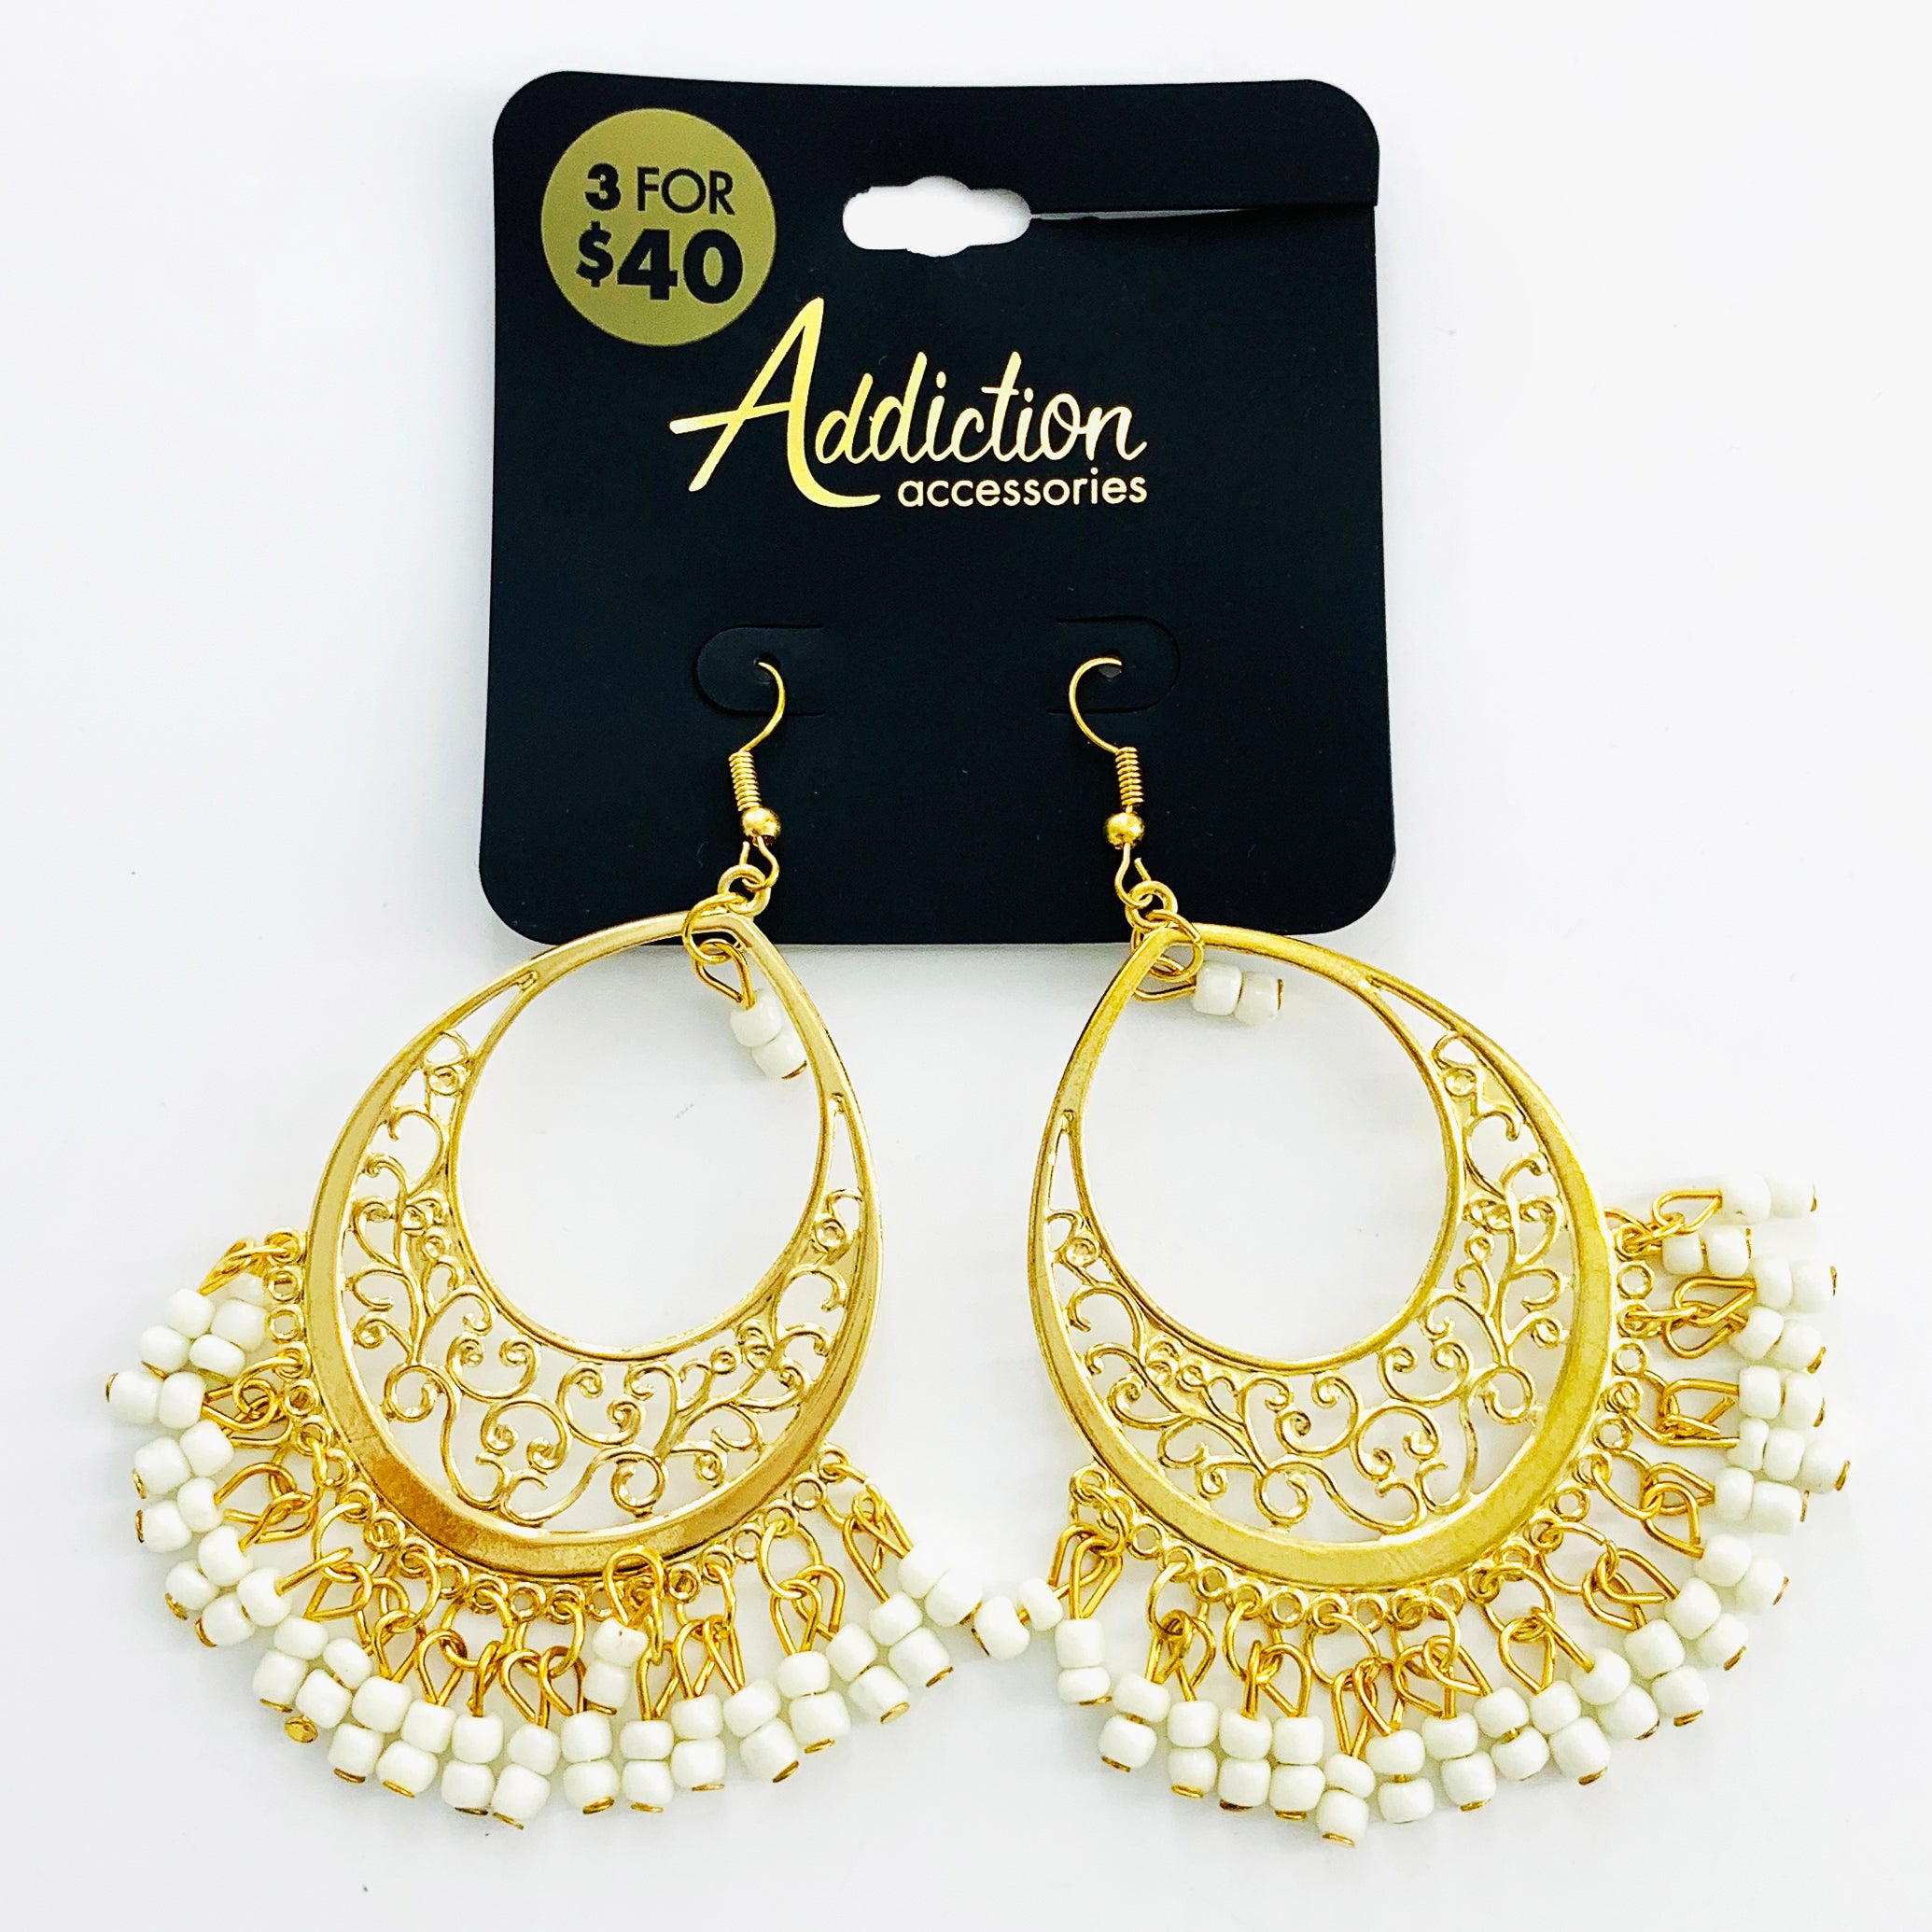 Ethnic-inspired gold earrings with white beads